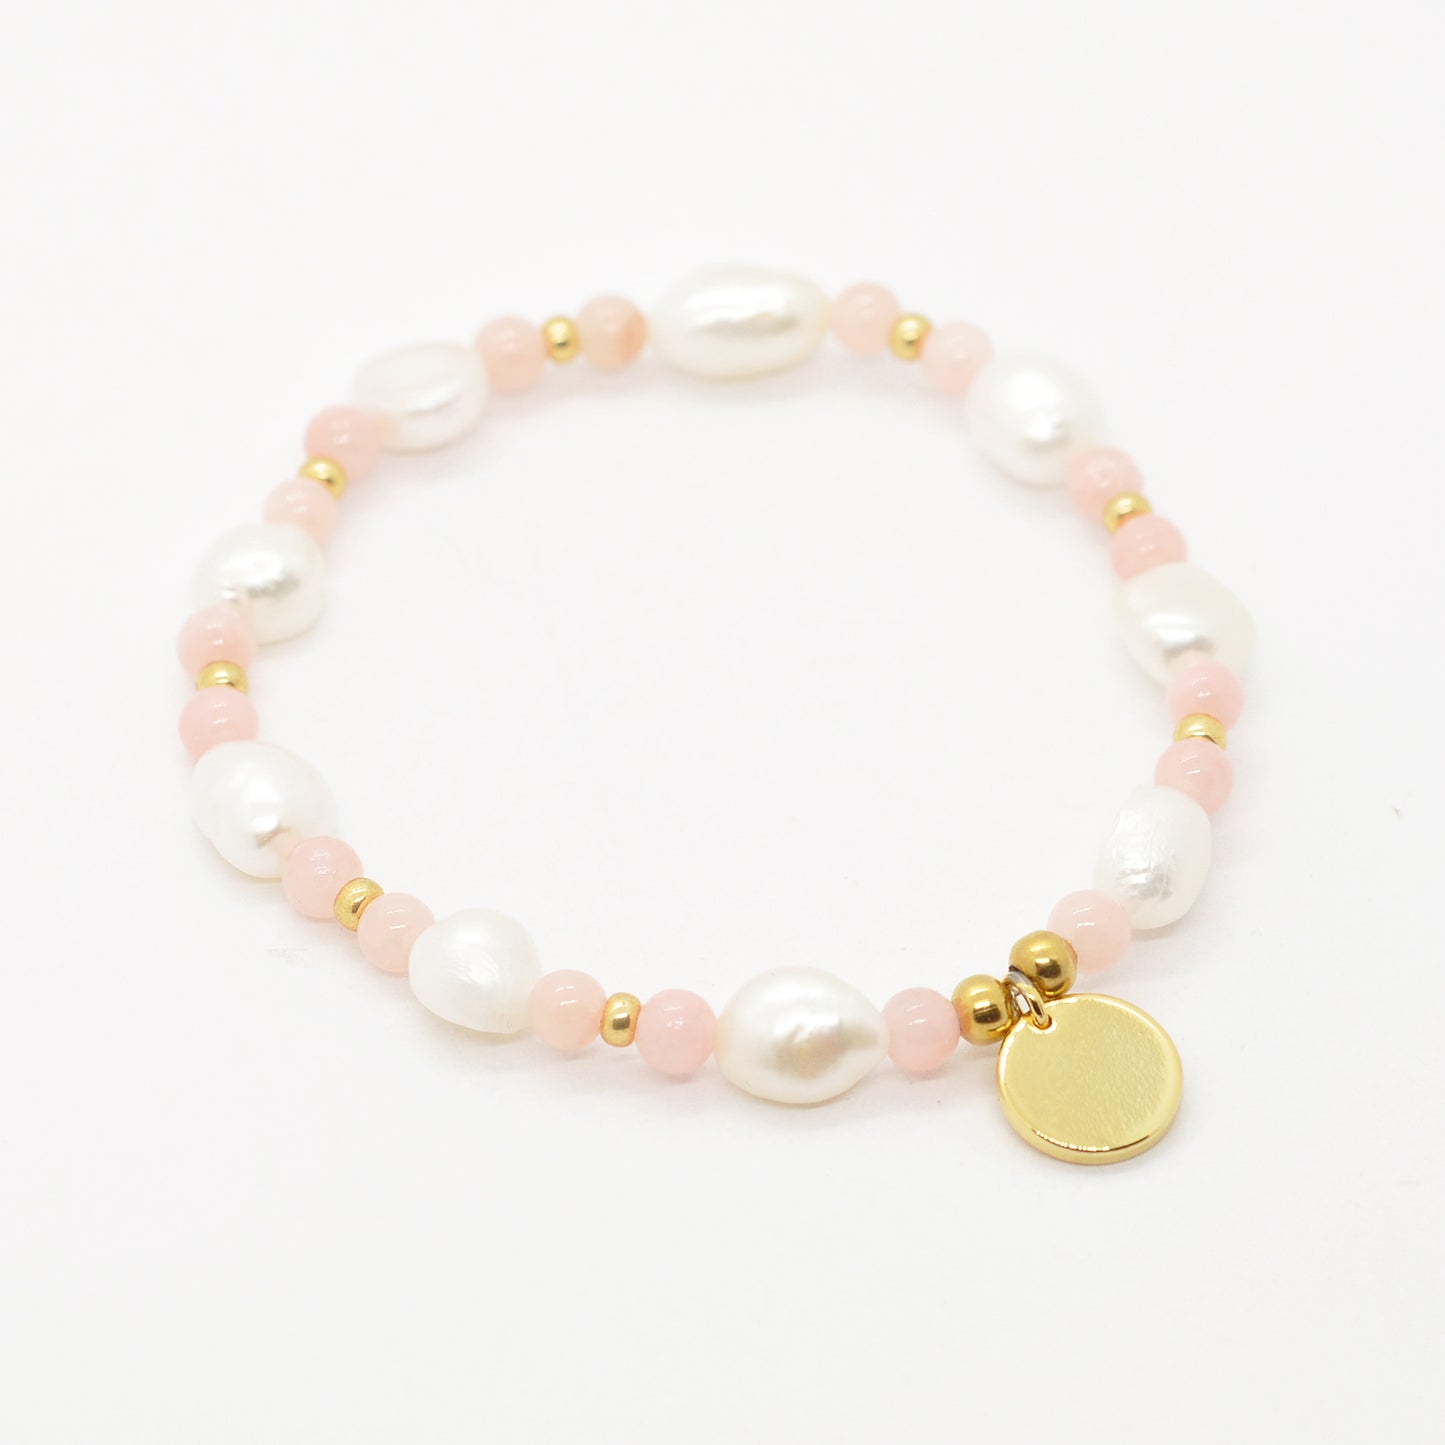 Mama bracelet made of freshwater pearls / stainless steel gold plated